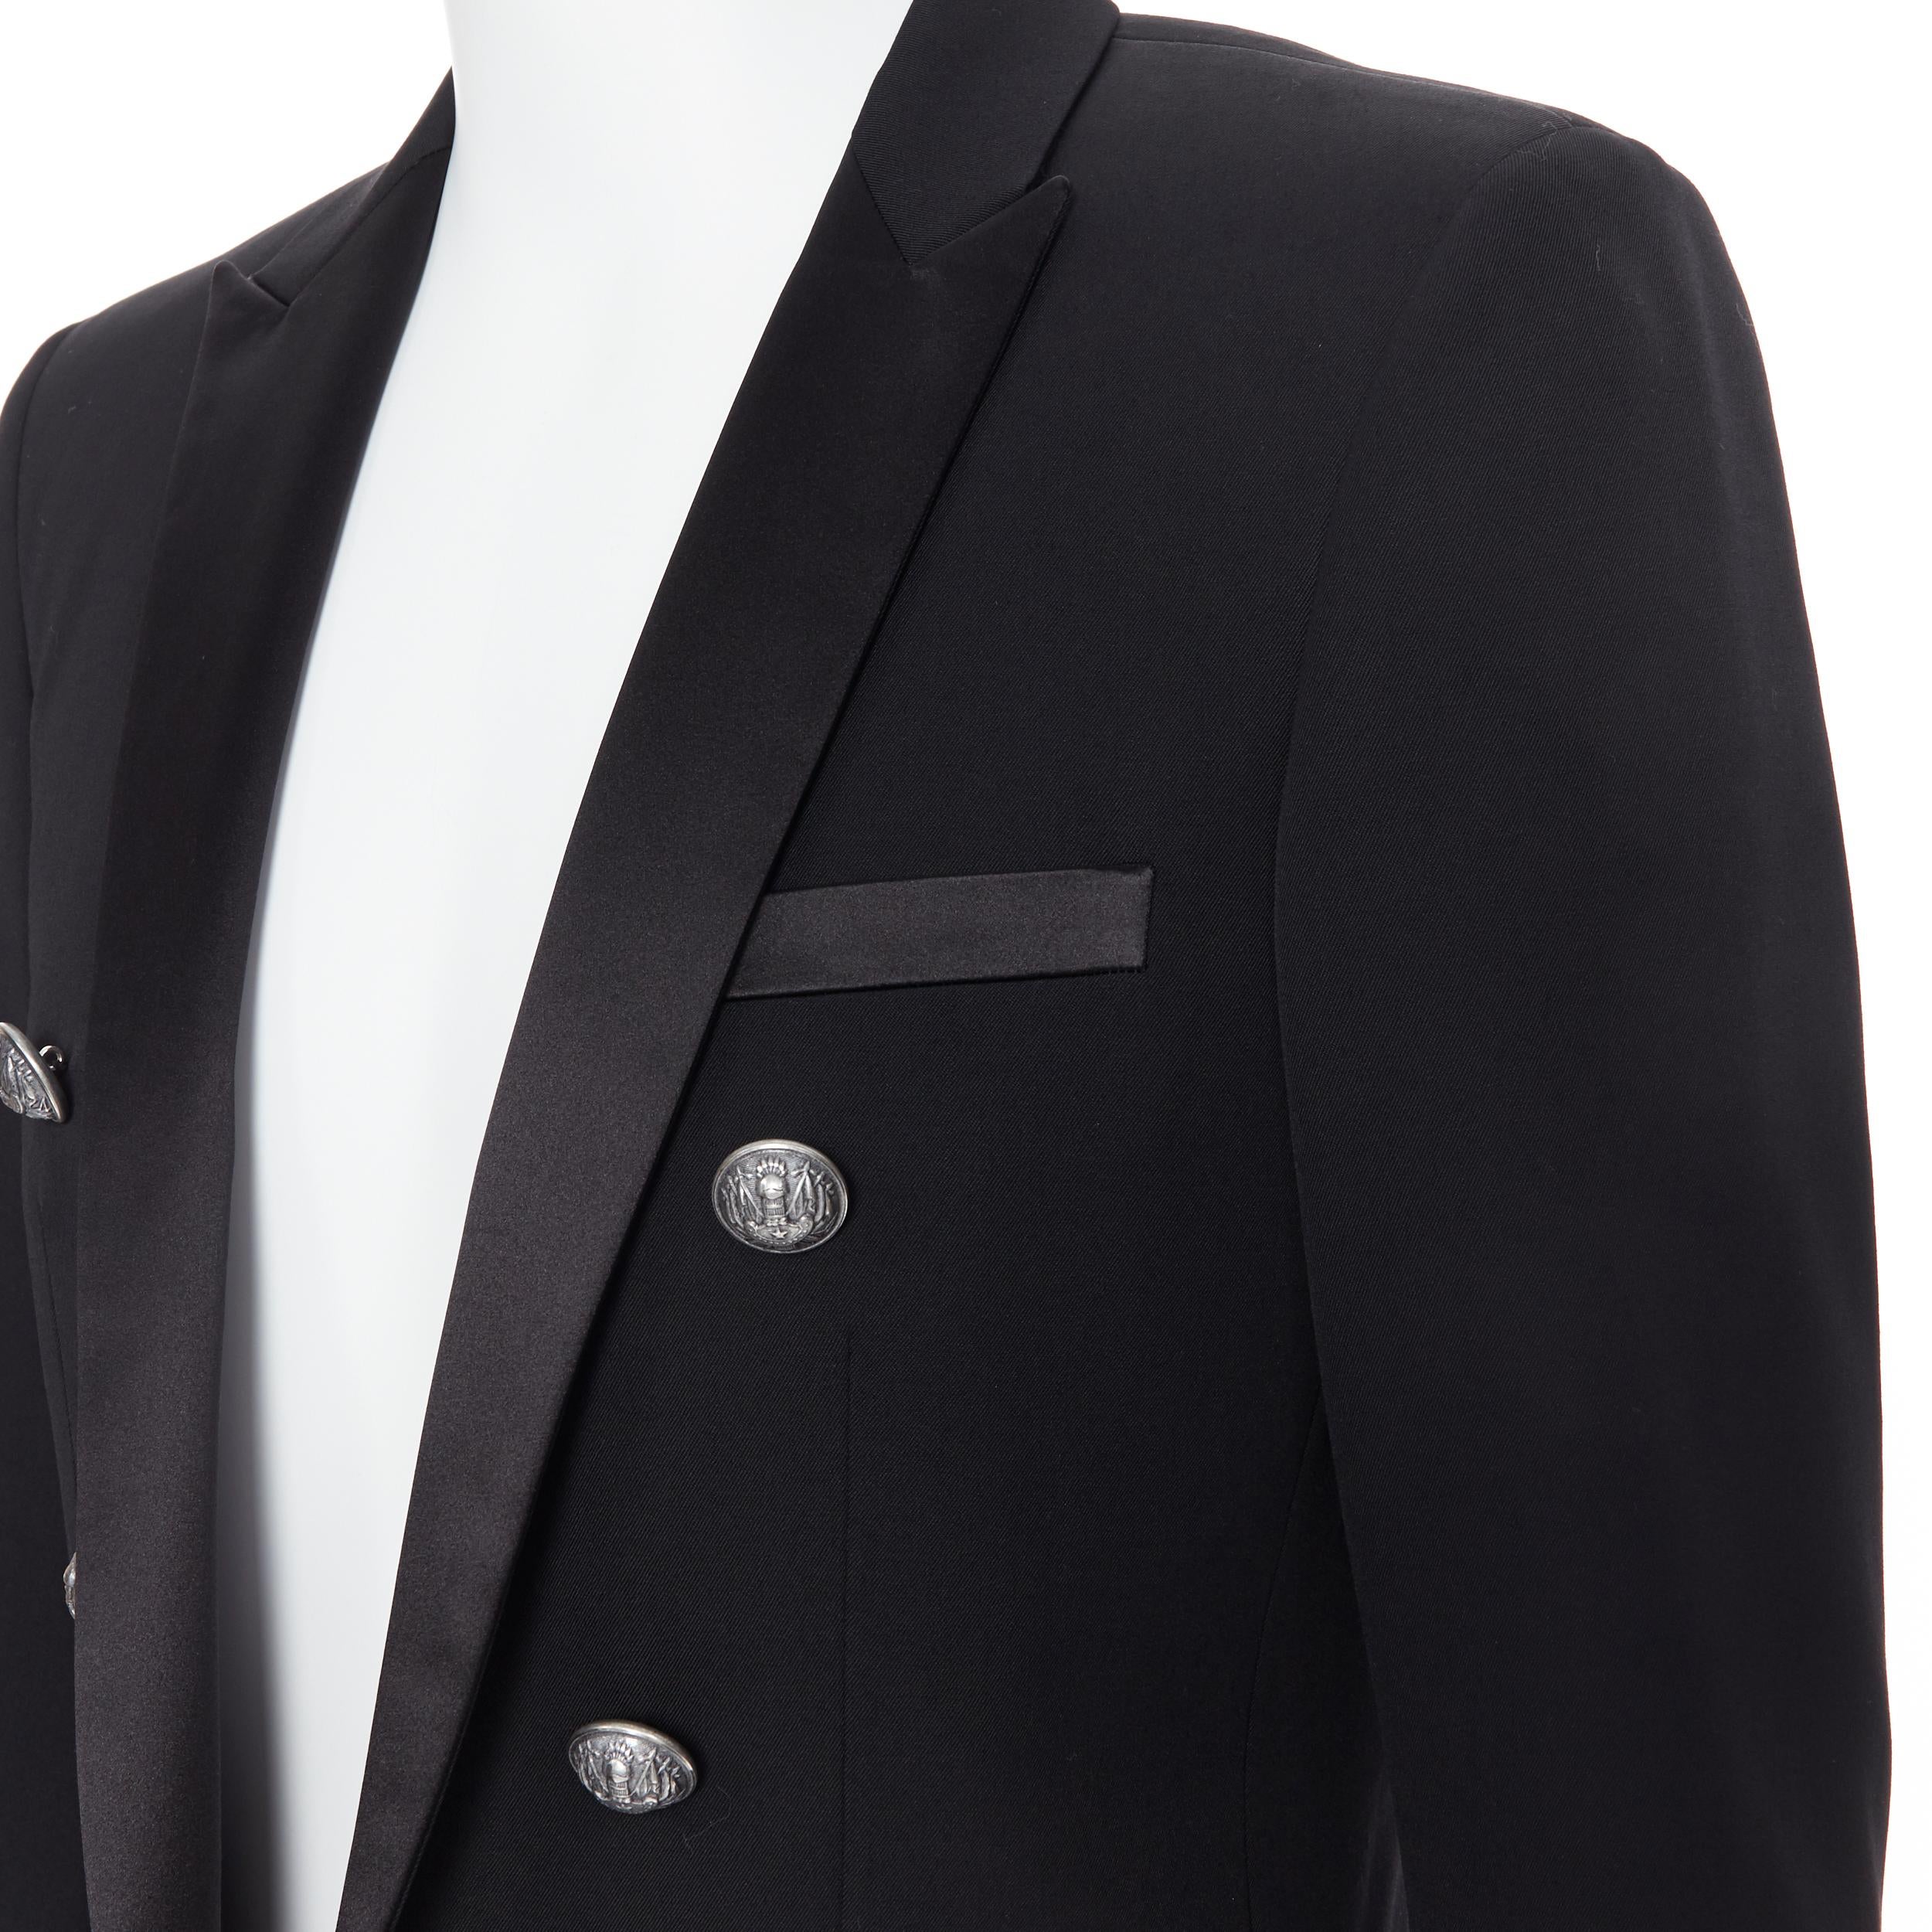 new BALMAIN black wool satin peak label double breasted military blazer EU50 L
Brand: Balmain
Designer: Olivier Rousteing
Model Name / Style: Double breasted jacket
Material: Wool
Color: Black
Pattern: Solid
Closure: Button
Extra Detail: BALMAIN